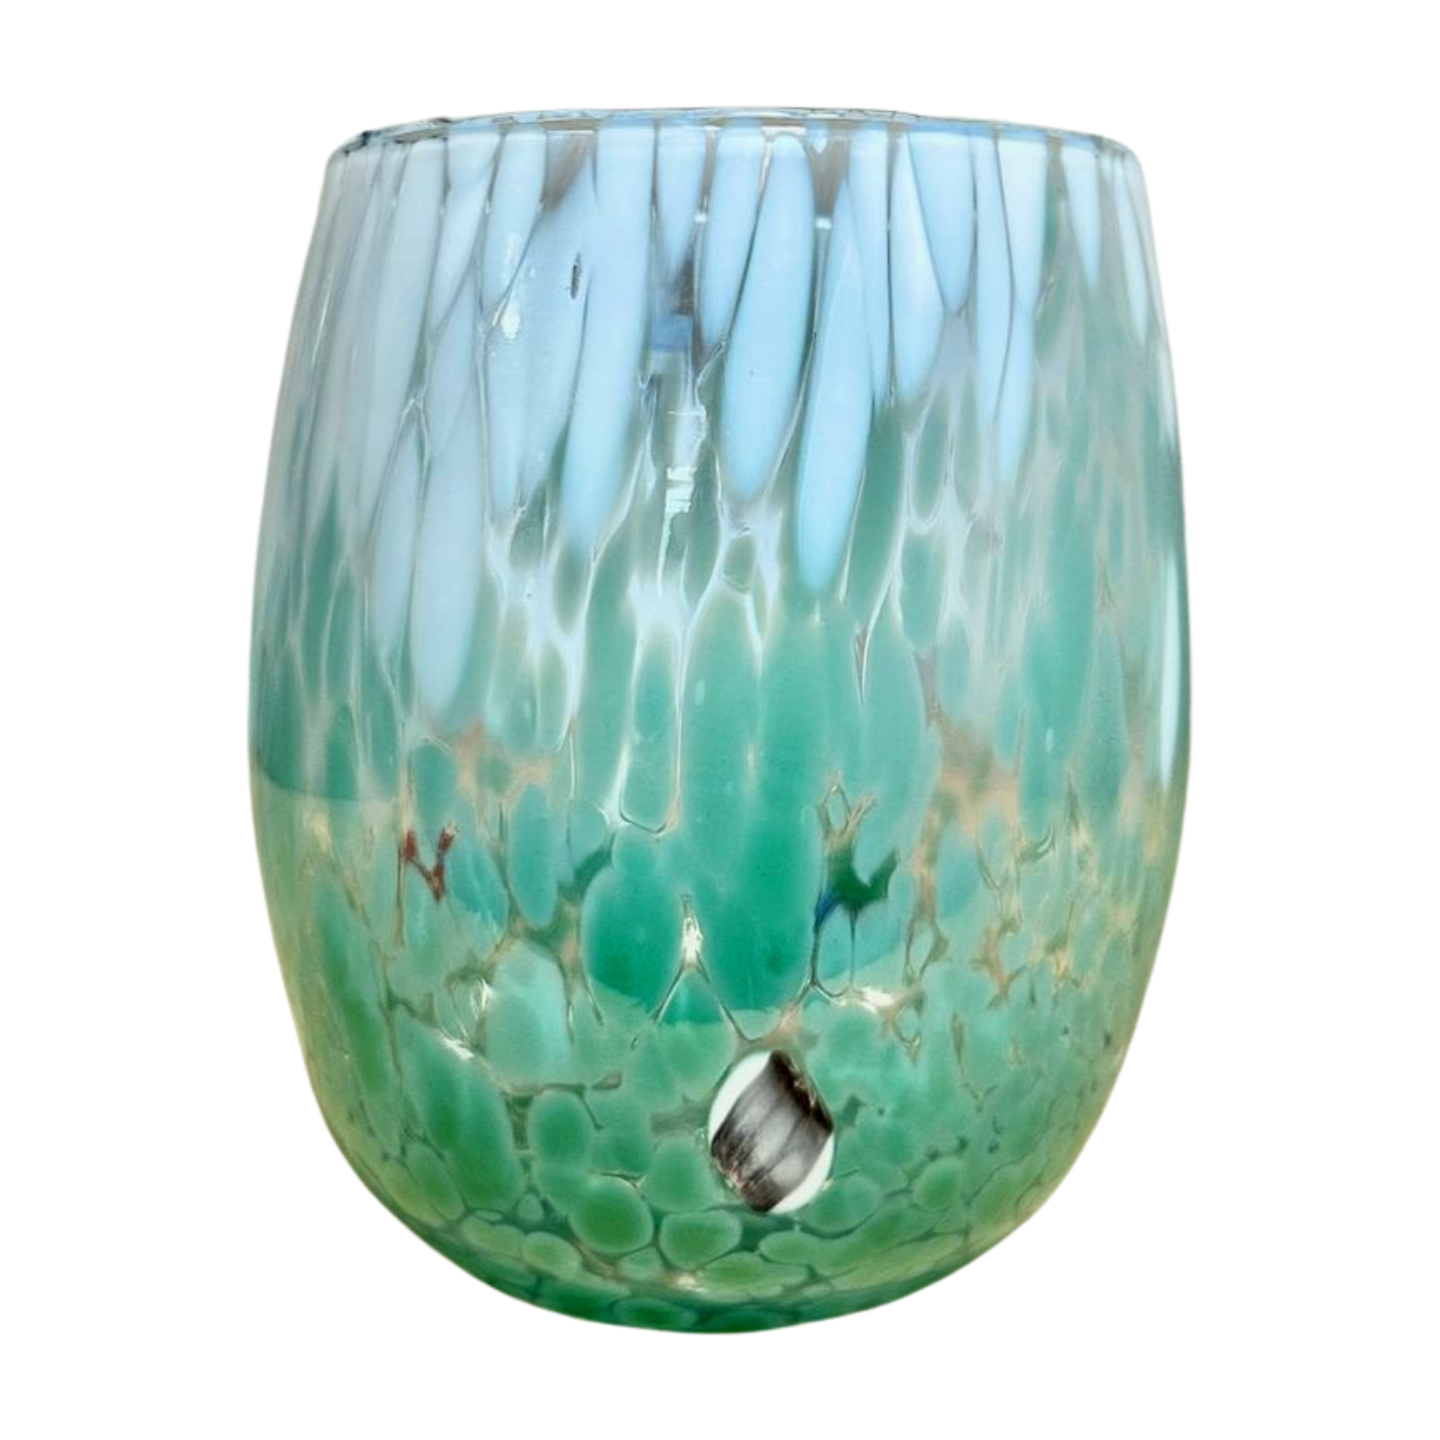 Stemless Murano Wine Glass, Two-Tone shown in green.